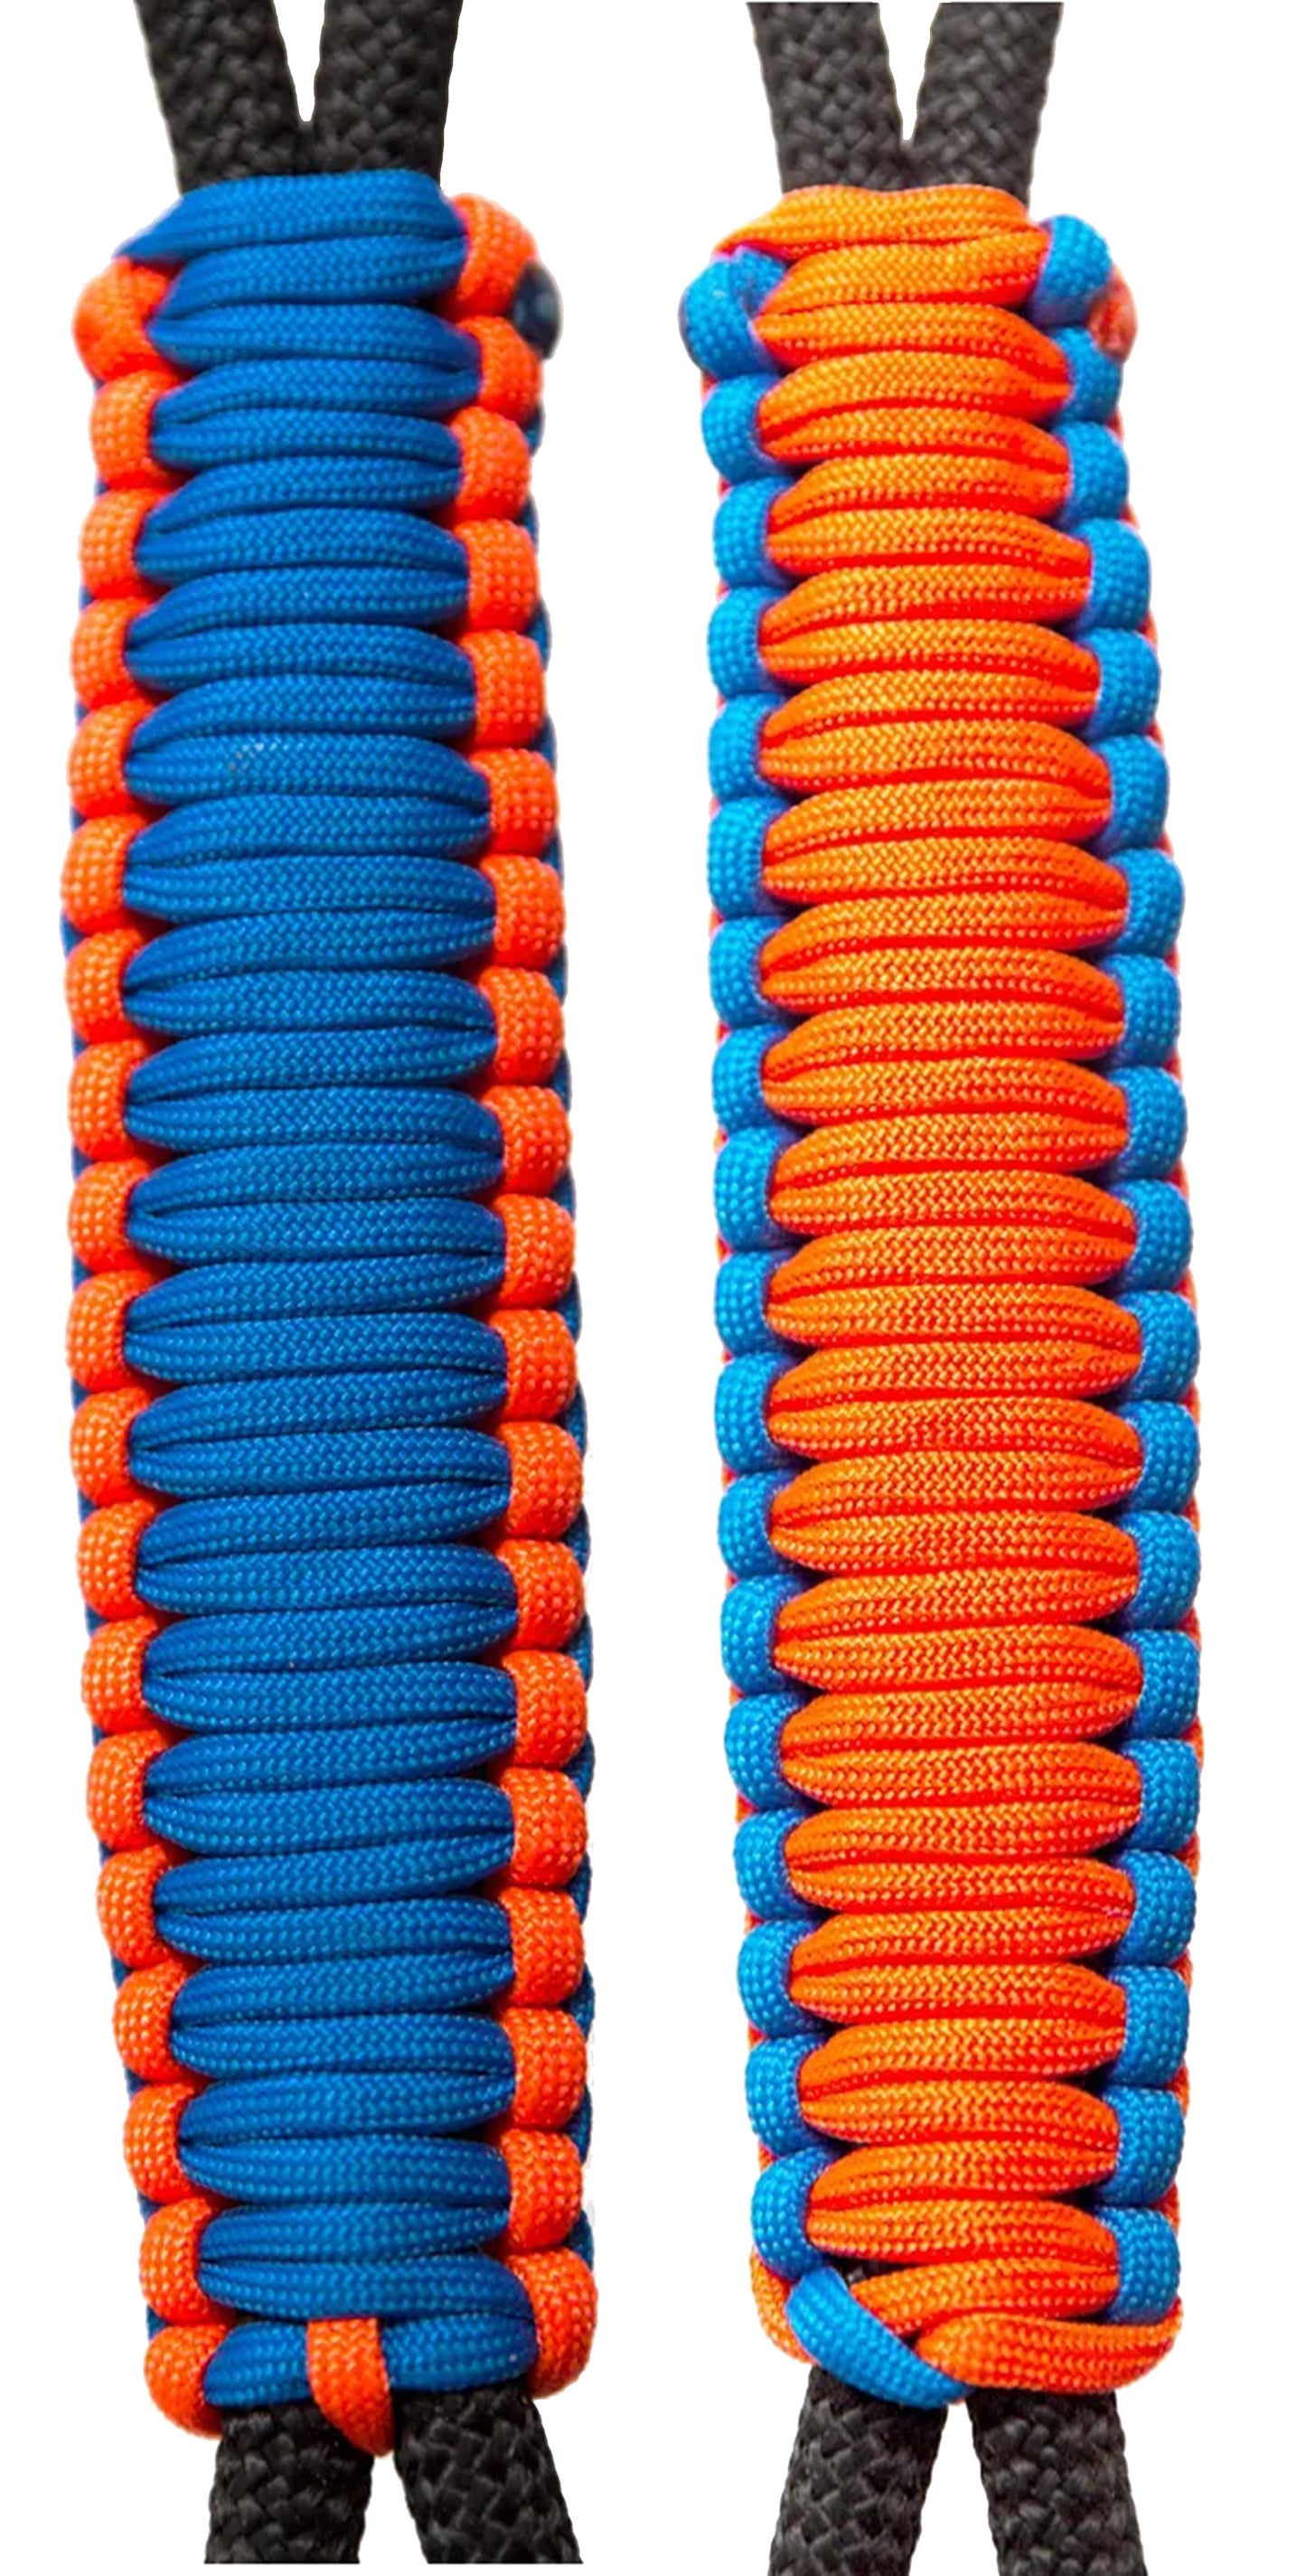 C001C012 - Neon Orange/Royal Blue Handle - Paracord Handmade Handles for Stainless Steel Tumblers - Made in USA!